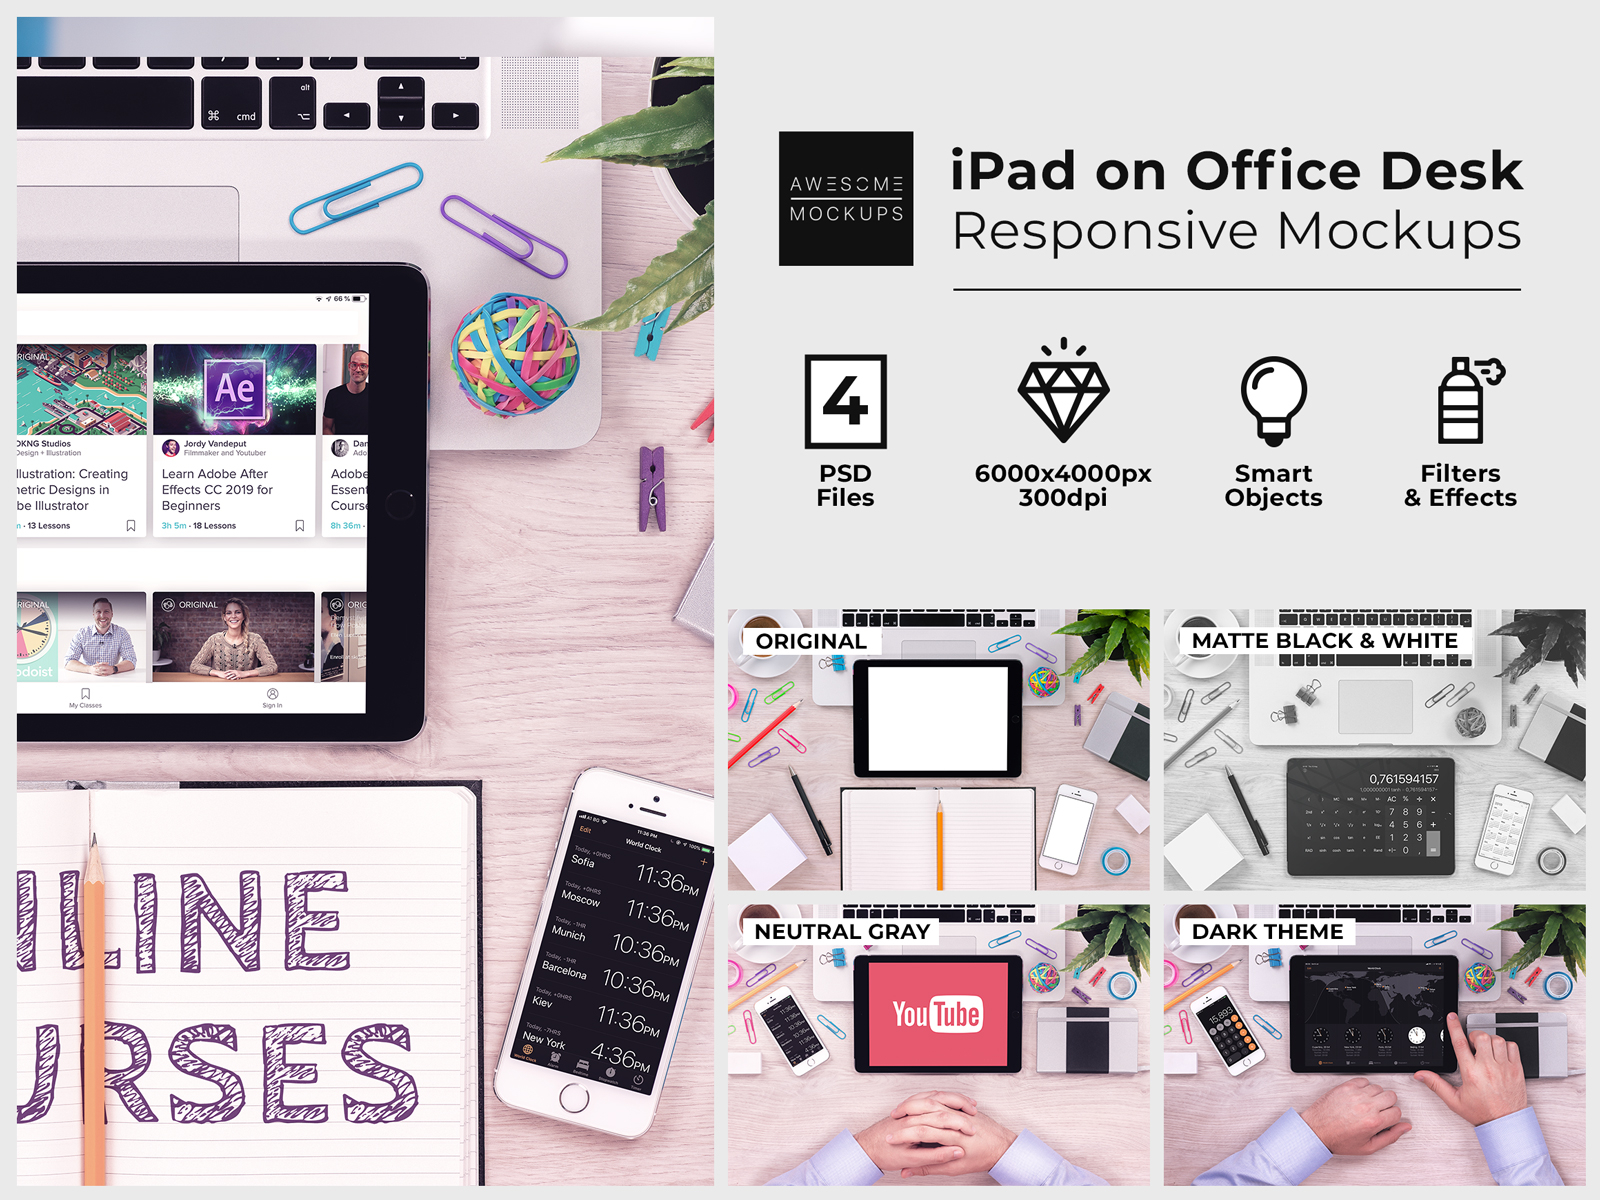 Download iPad on Office Desk Top View Mockups by Alexey Boldin on ...